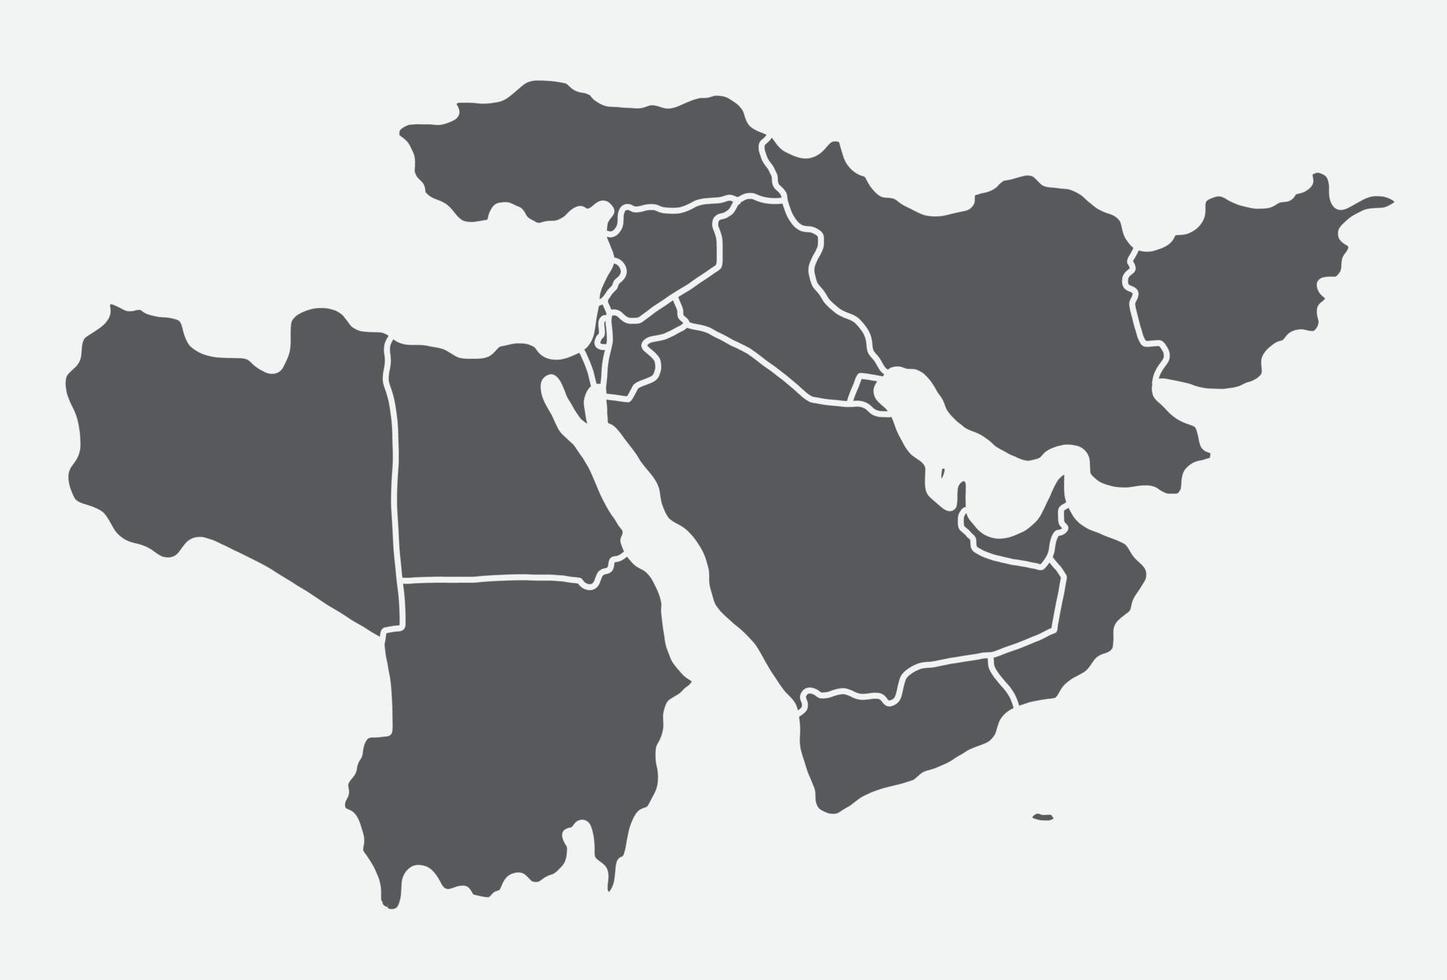 doodle freehand drawing of middle east map. vector